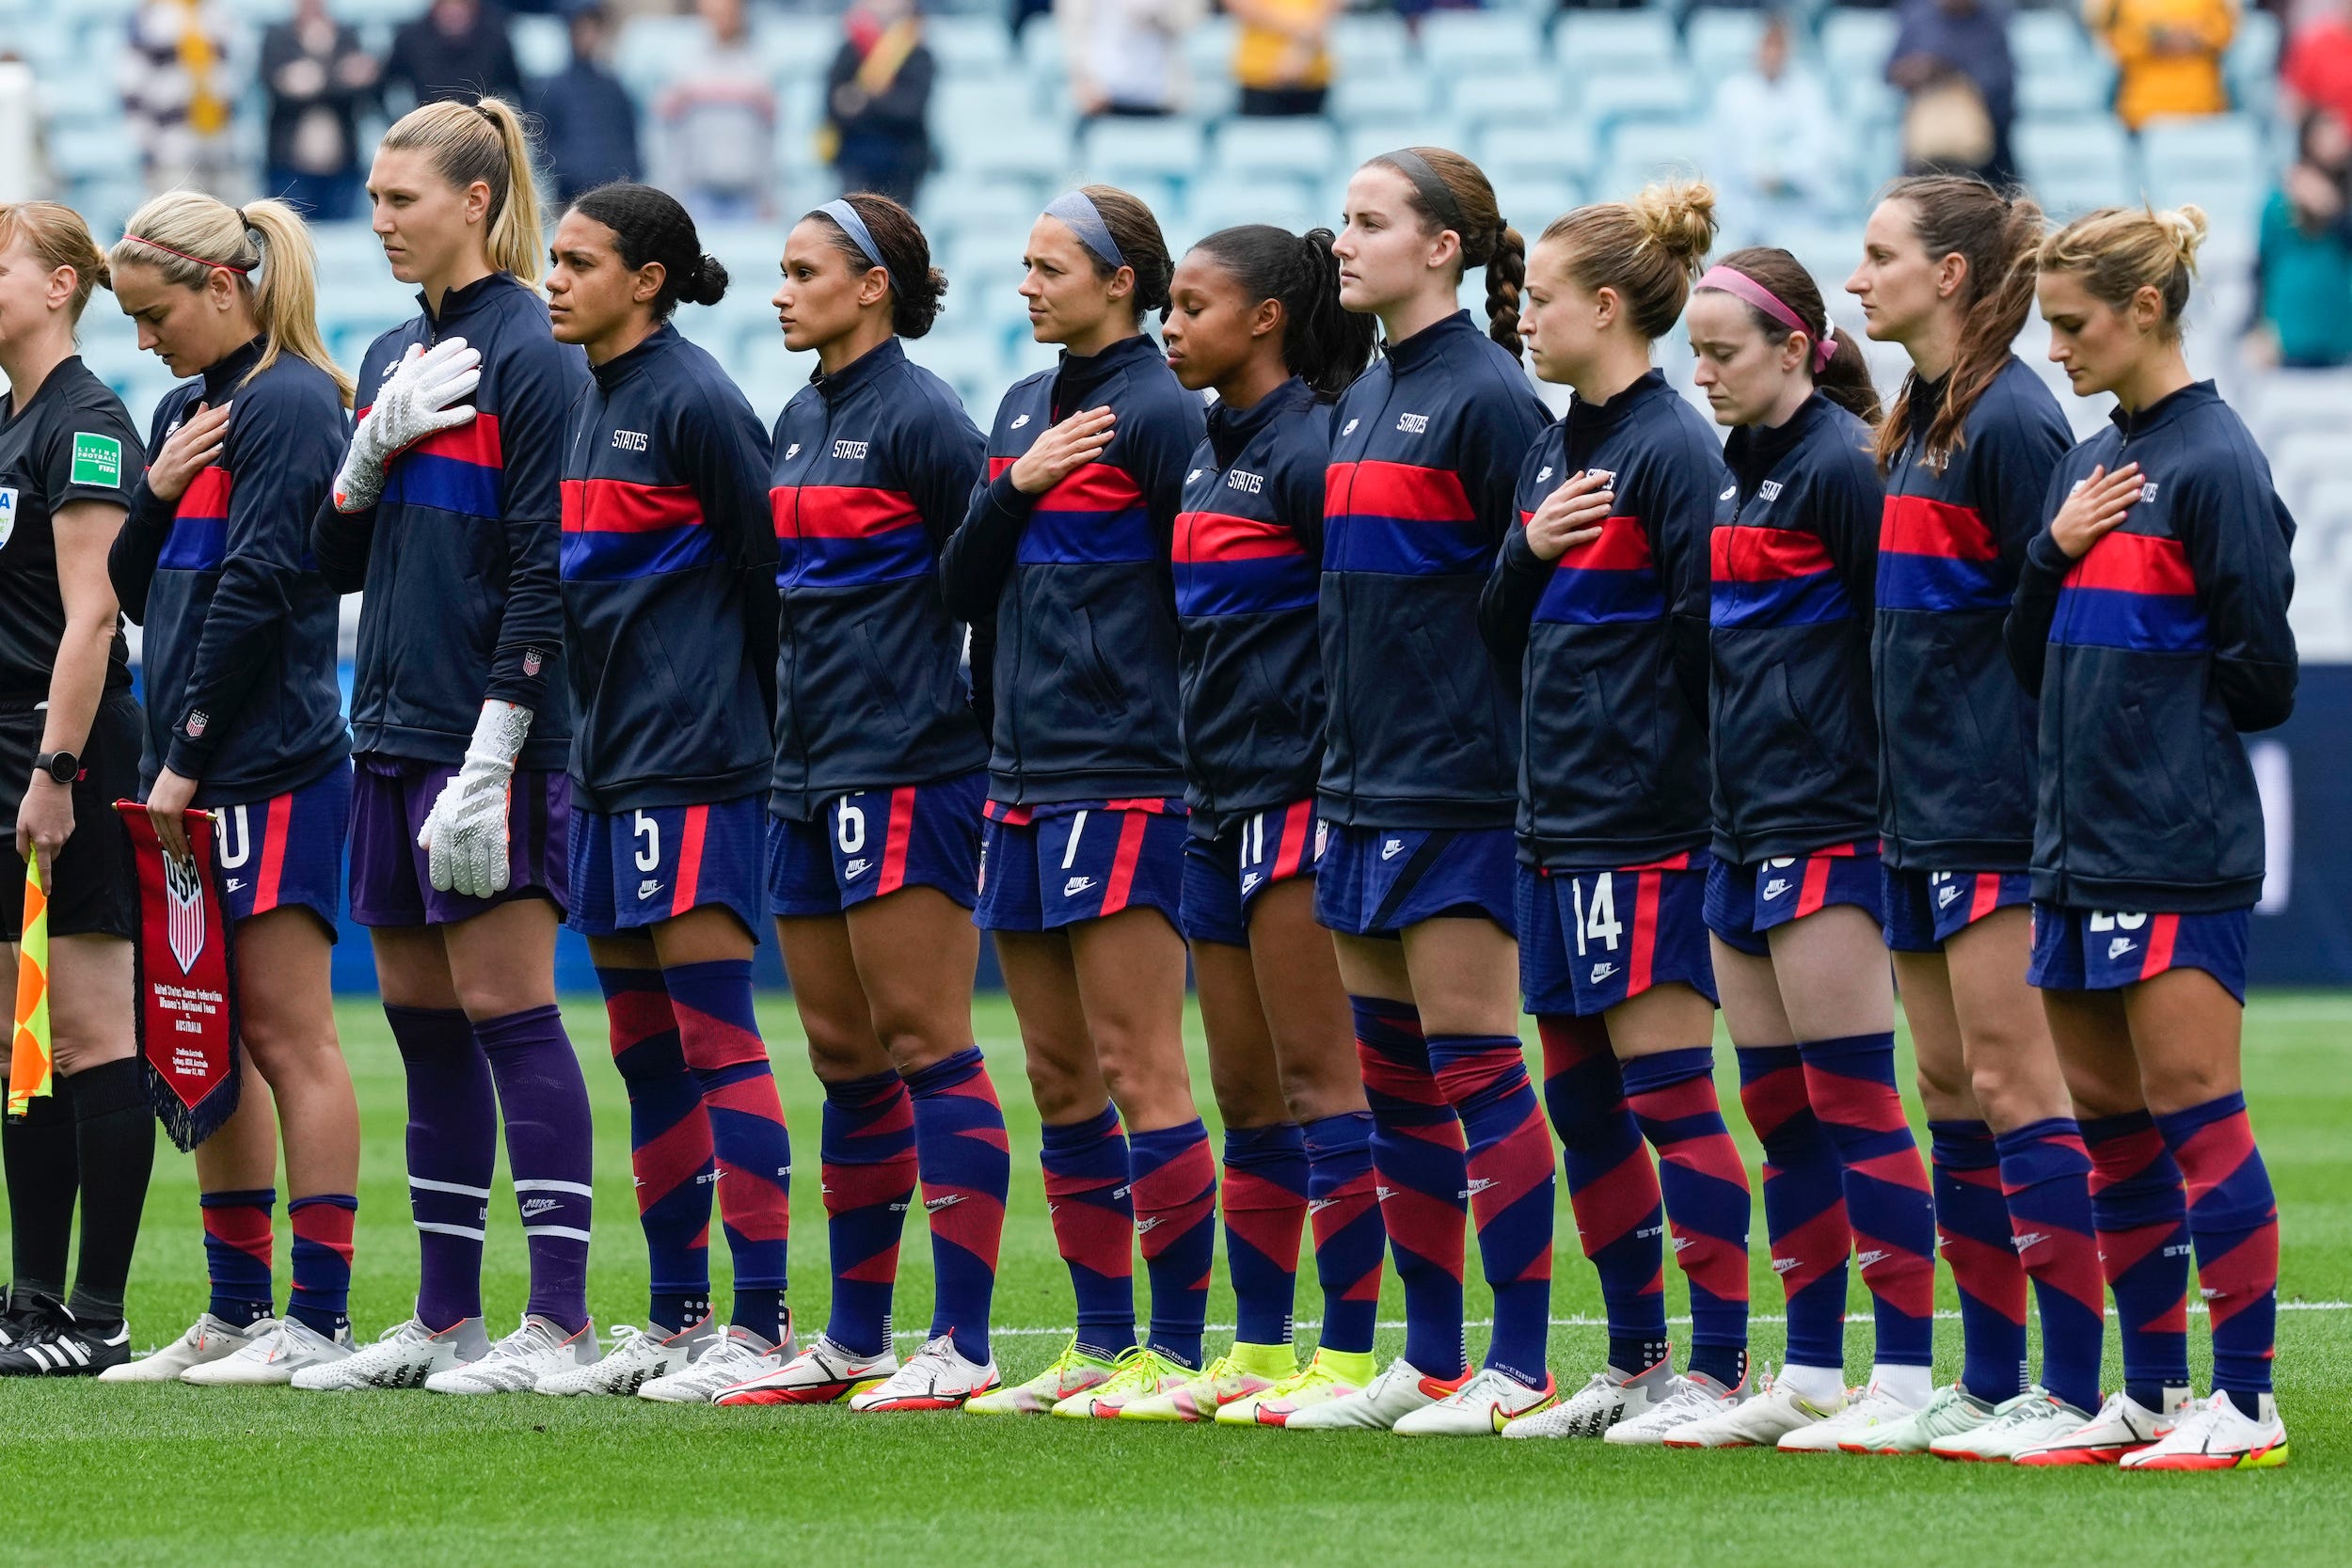 USWNT players line up ahead of a matchup against Australia.